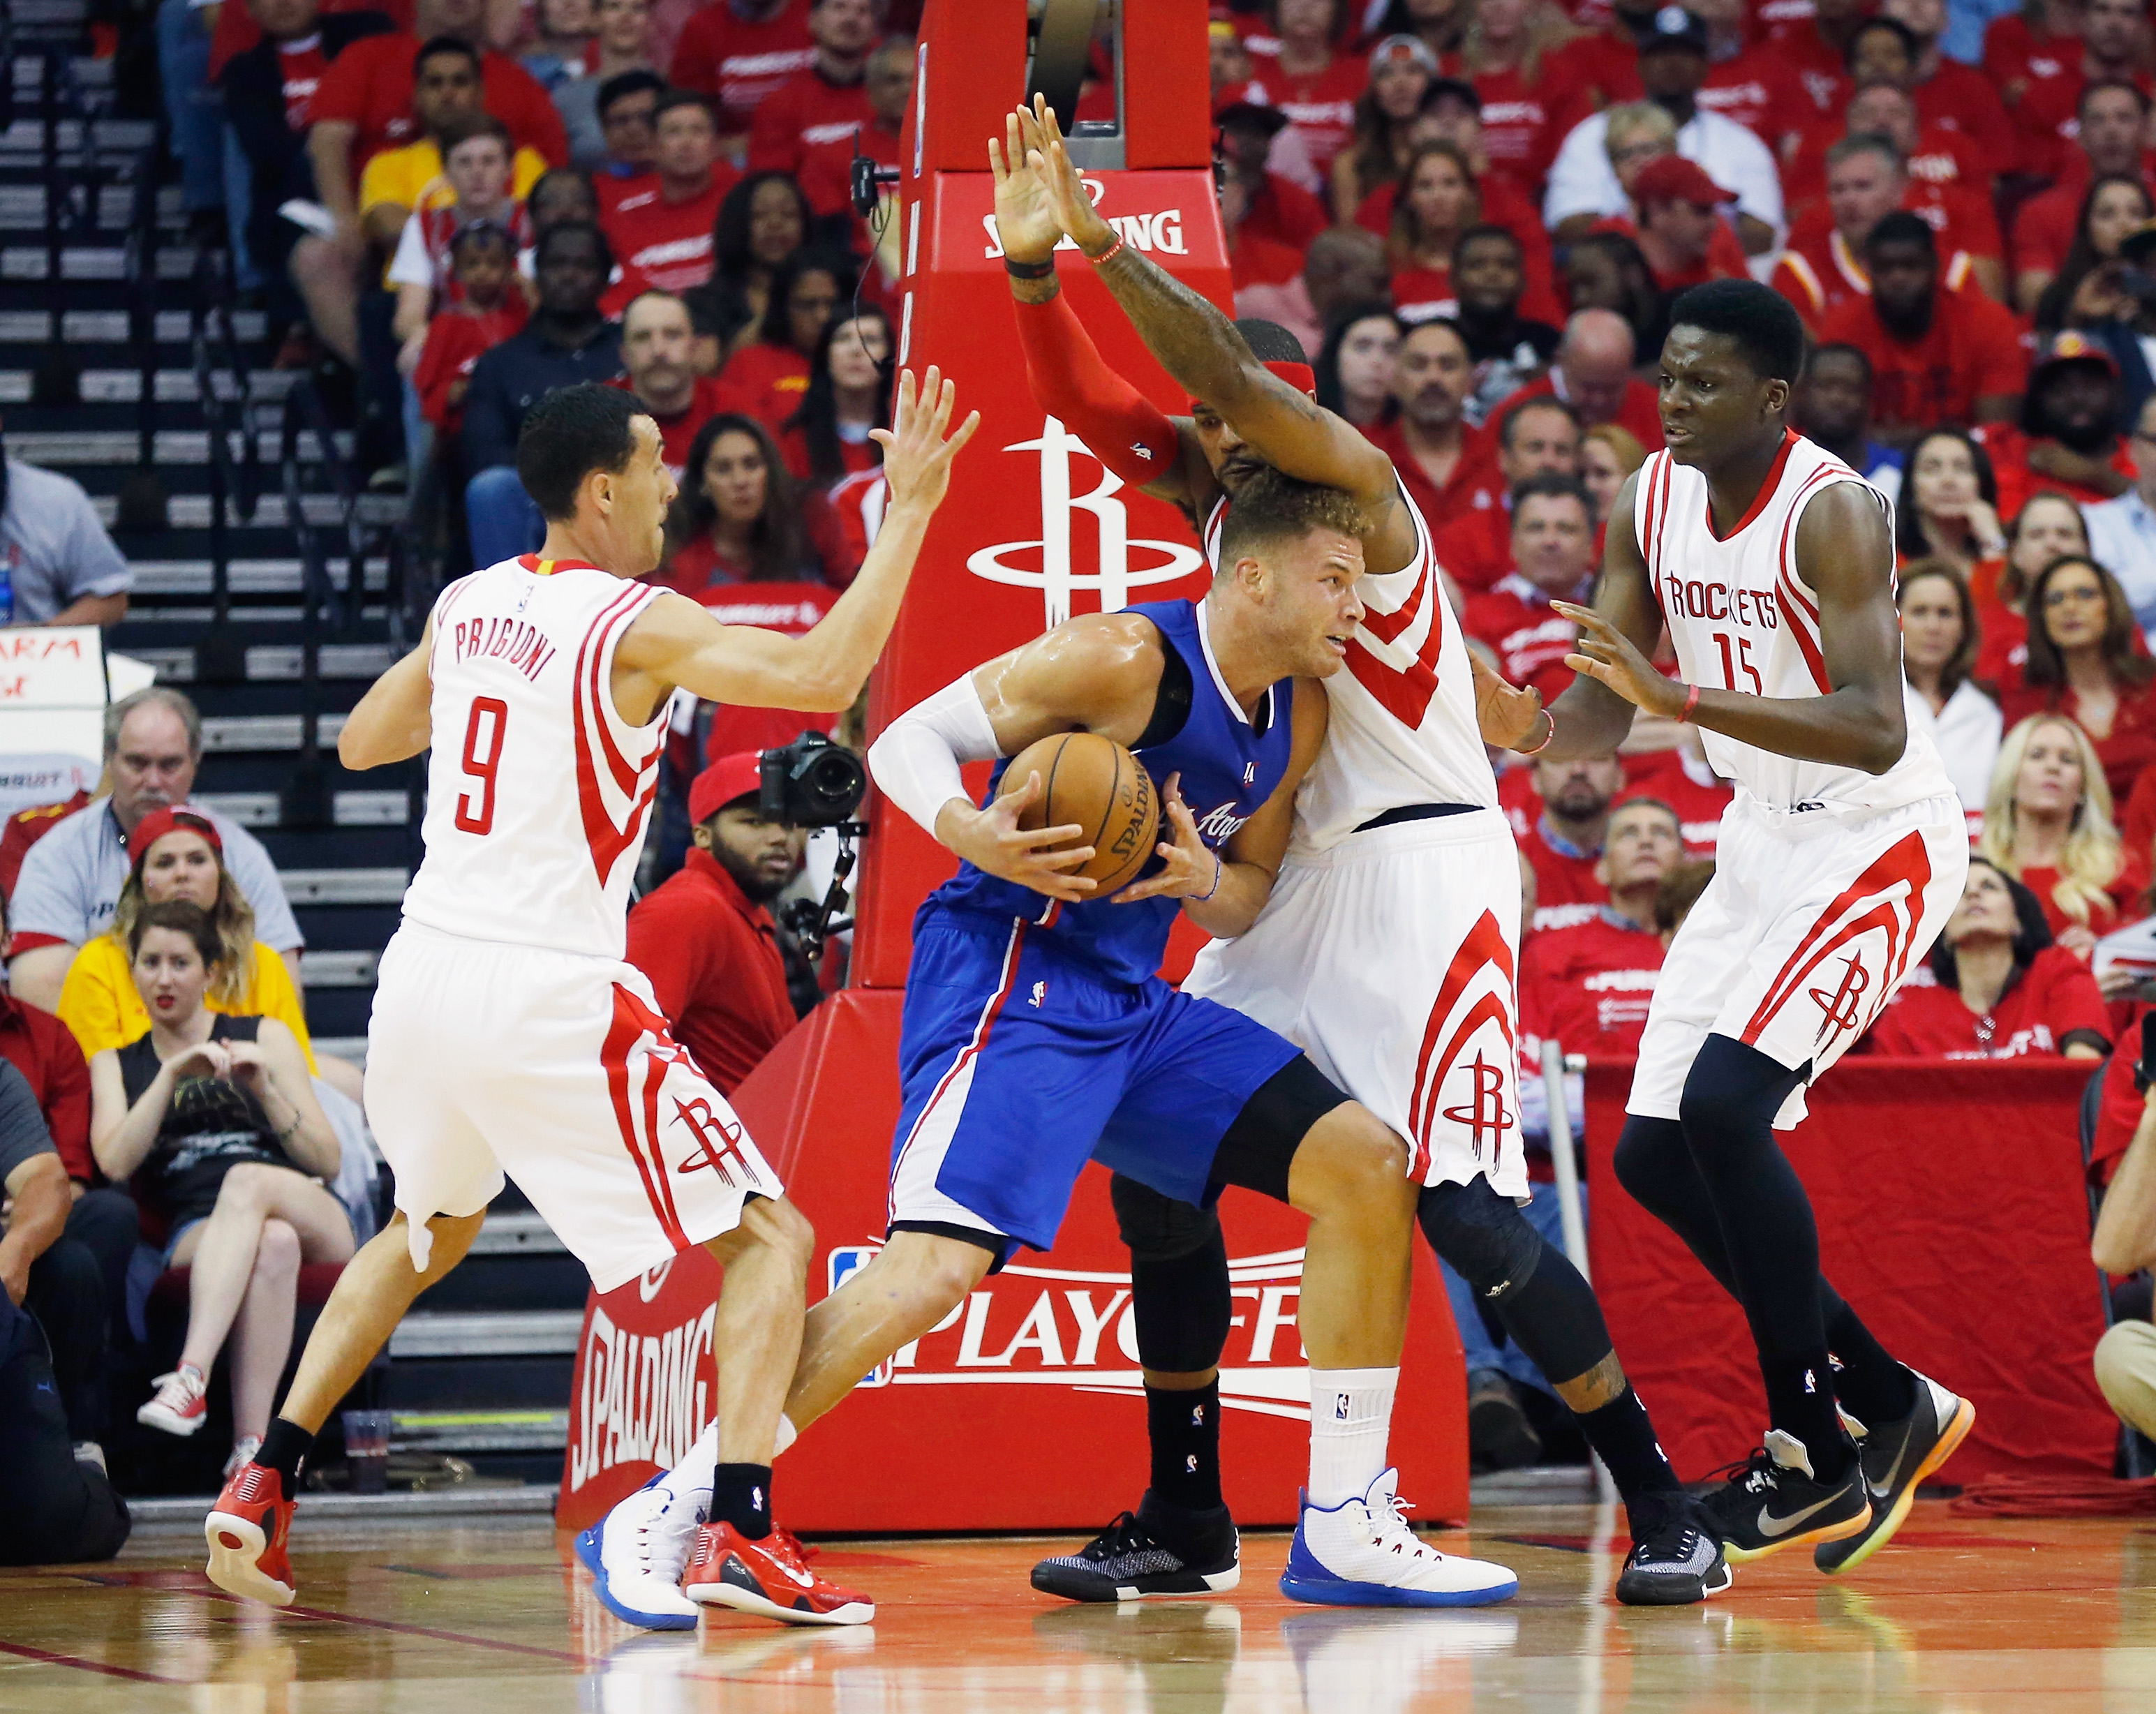 How to Watch Rockets vs. Clippers Game 2 Live Stream Online